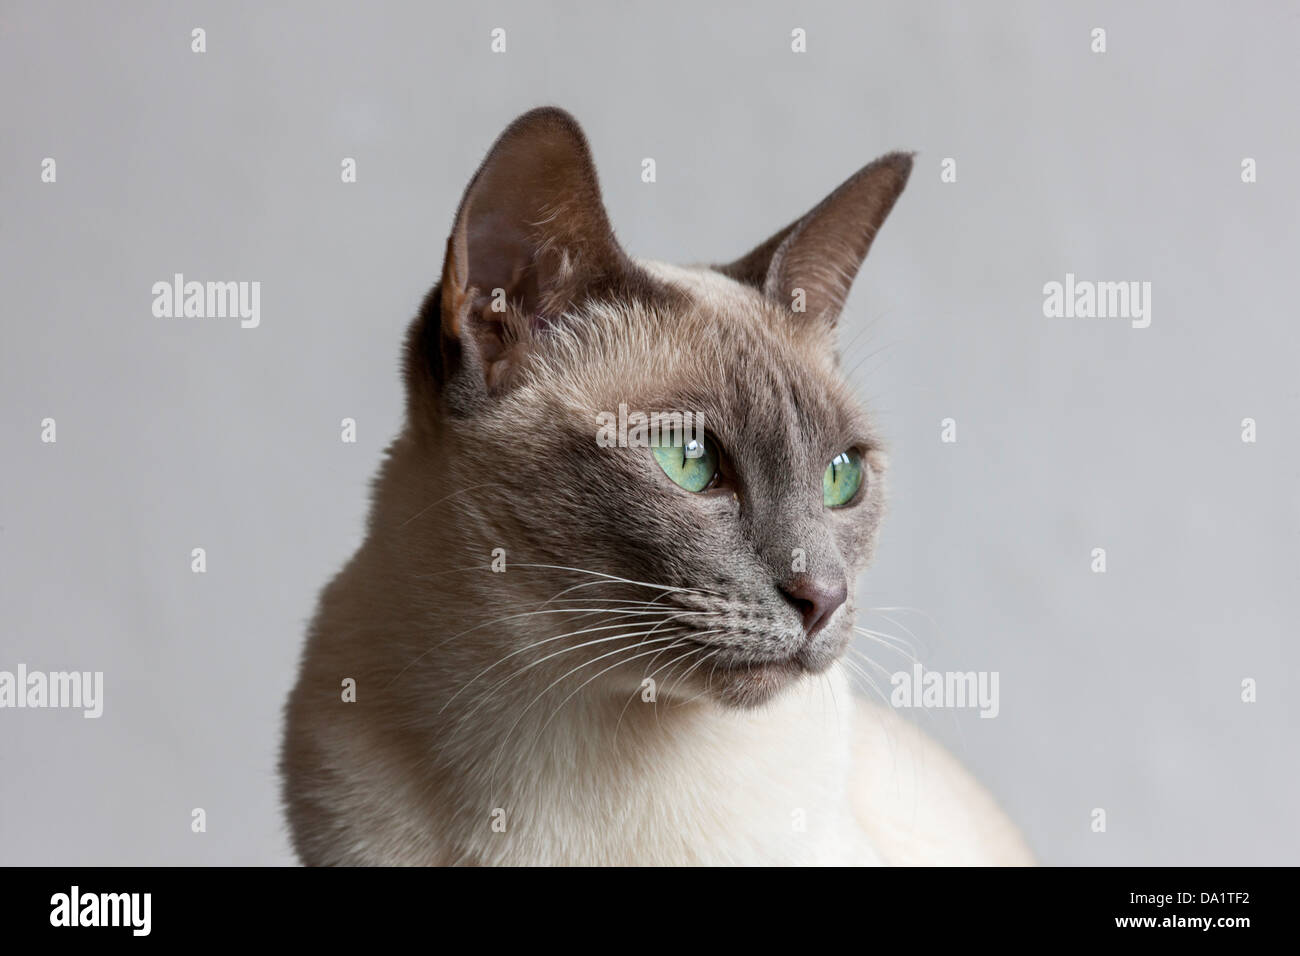 Tonkinese cat, result of a recent crossbreeding between Siamese and Burmese cat breeds Stock Photo